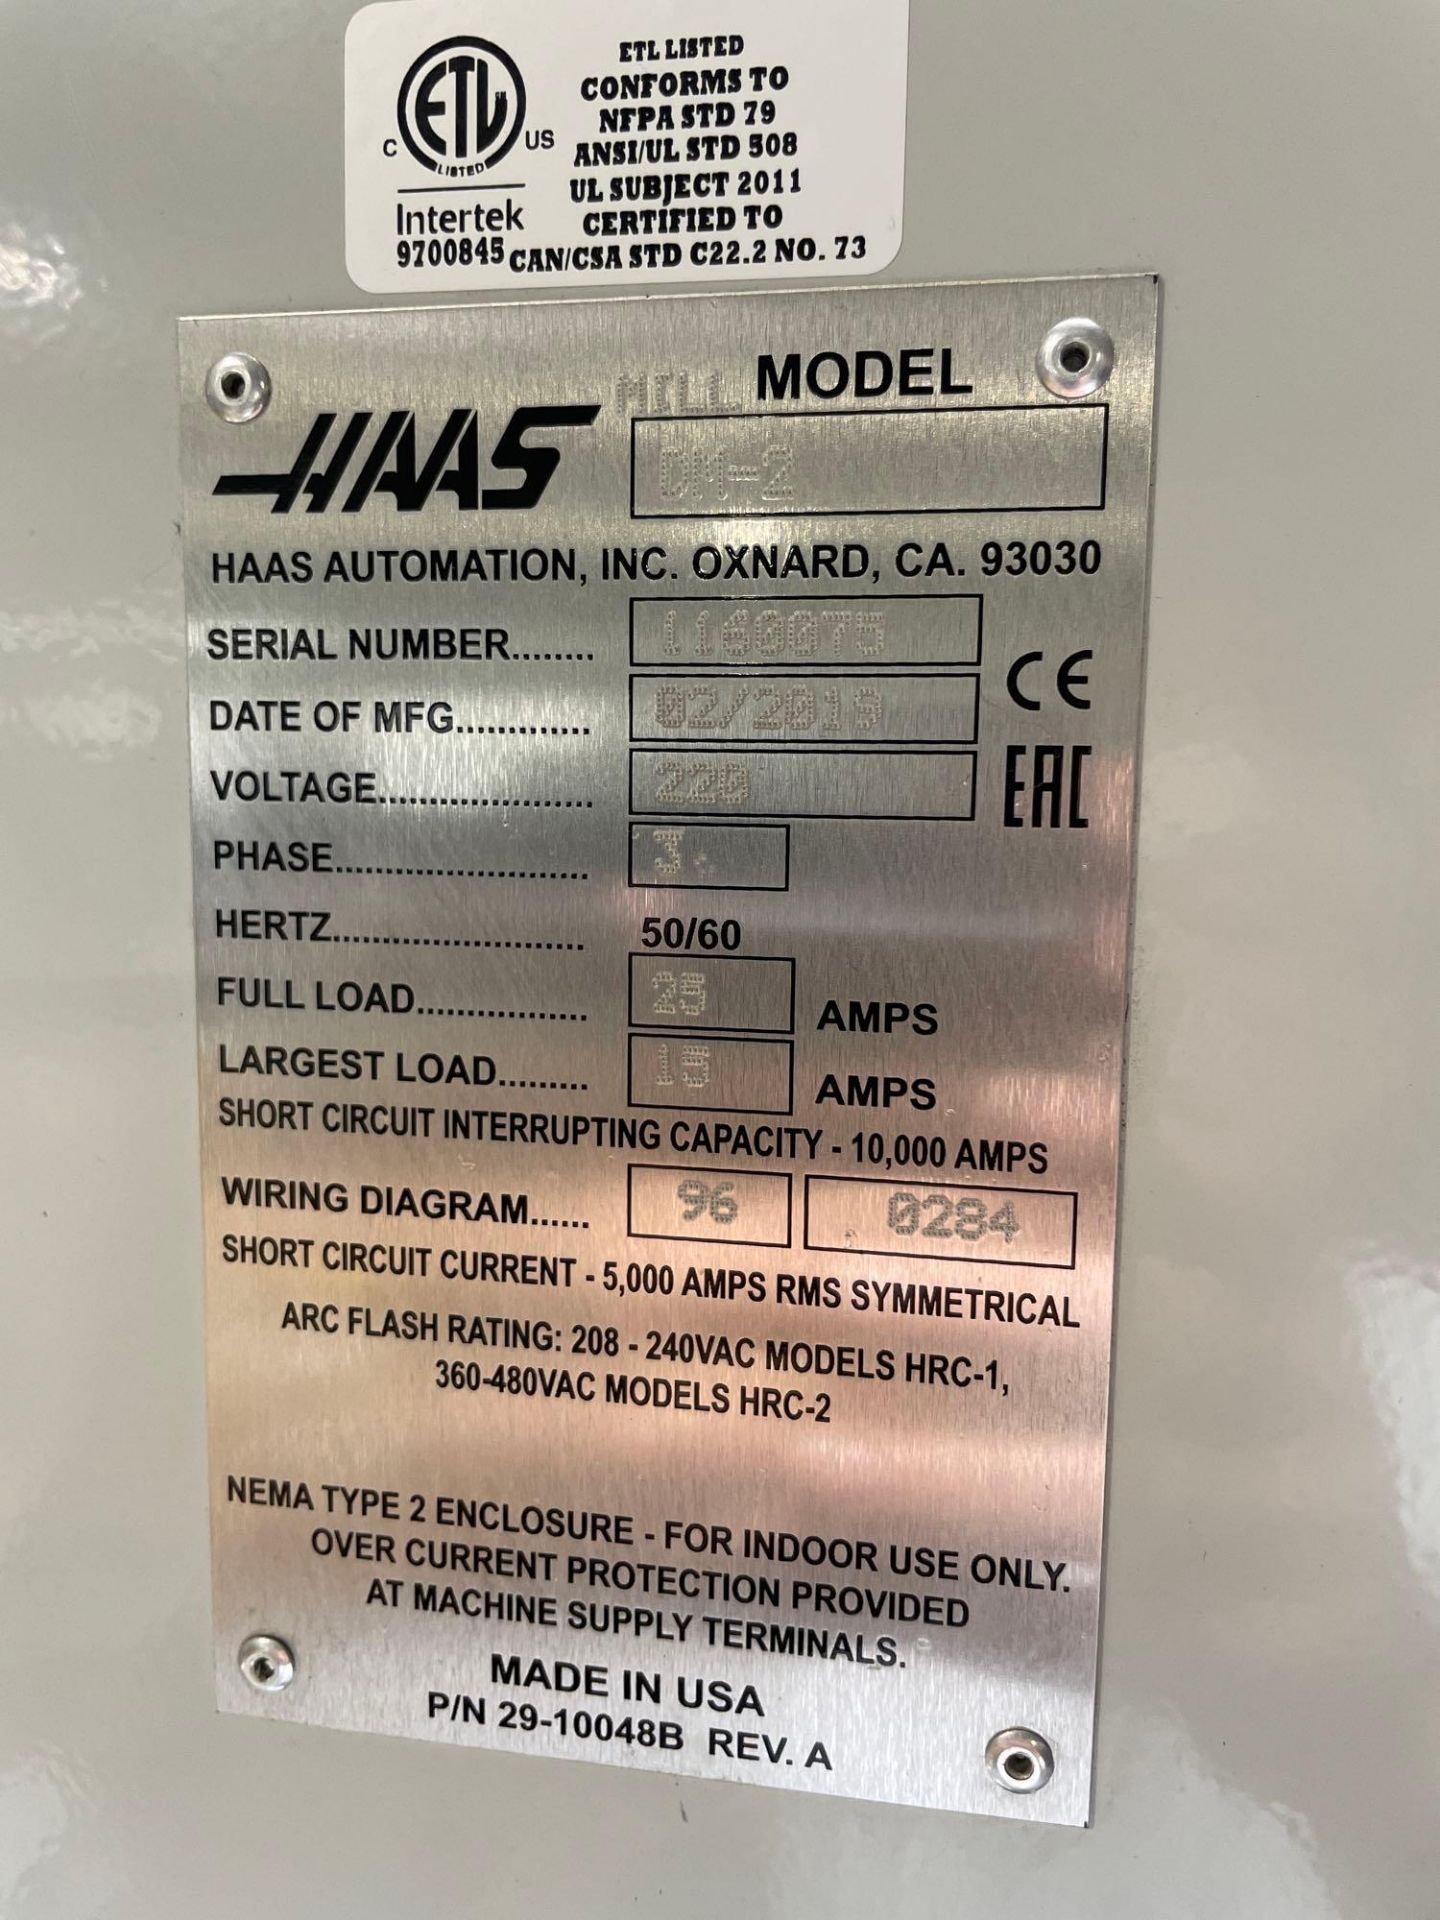 Haas DM-2, 28” x 16” 15.5” Travels, CT 40, 18+1 SMTC, 15K RPM, WIPS, New 2019 - Image 10 of 10